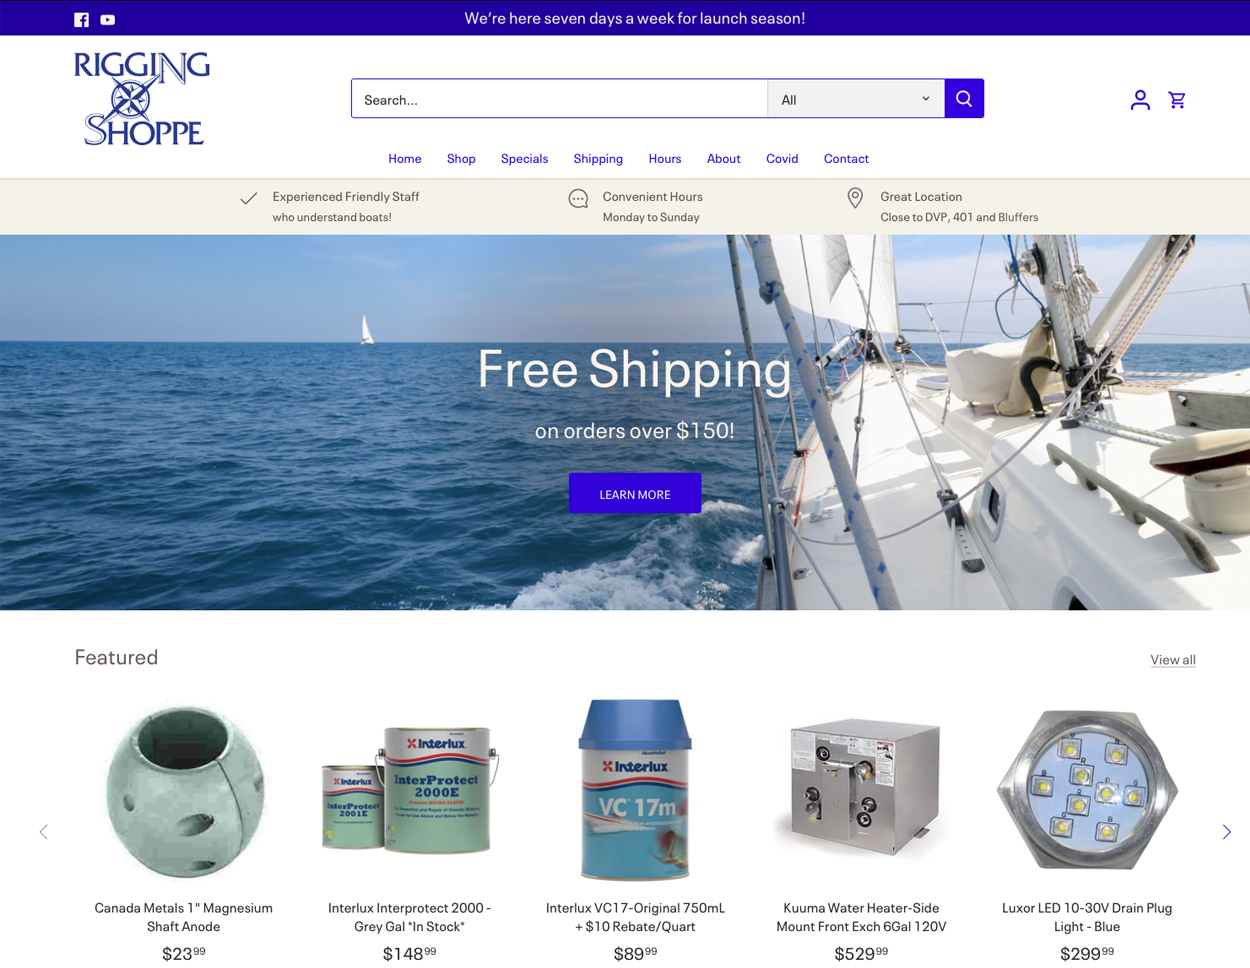 Rigging Shoppe home page.